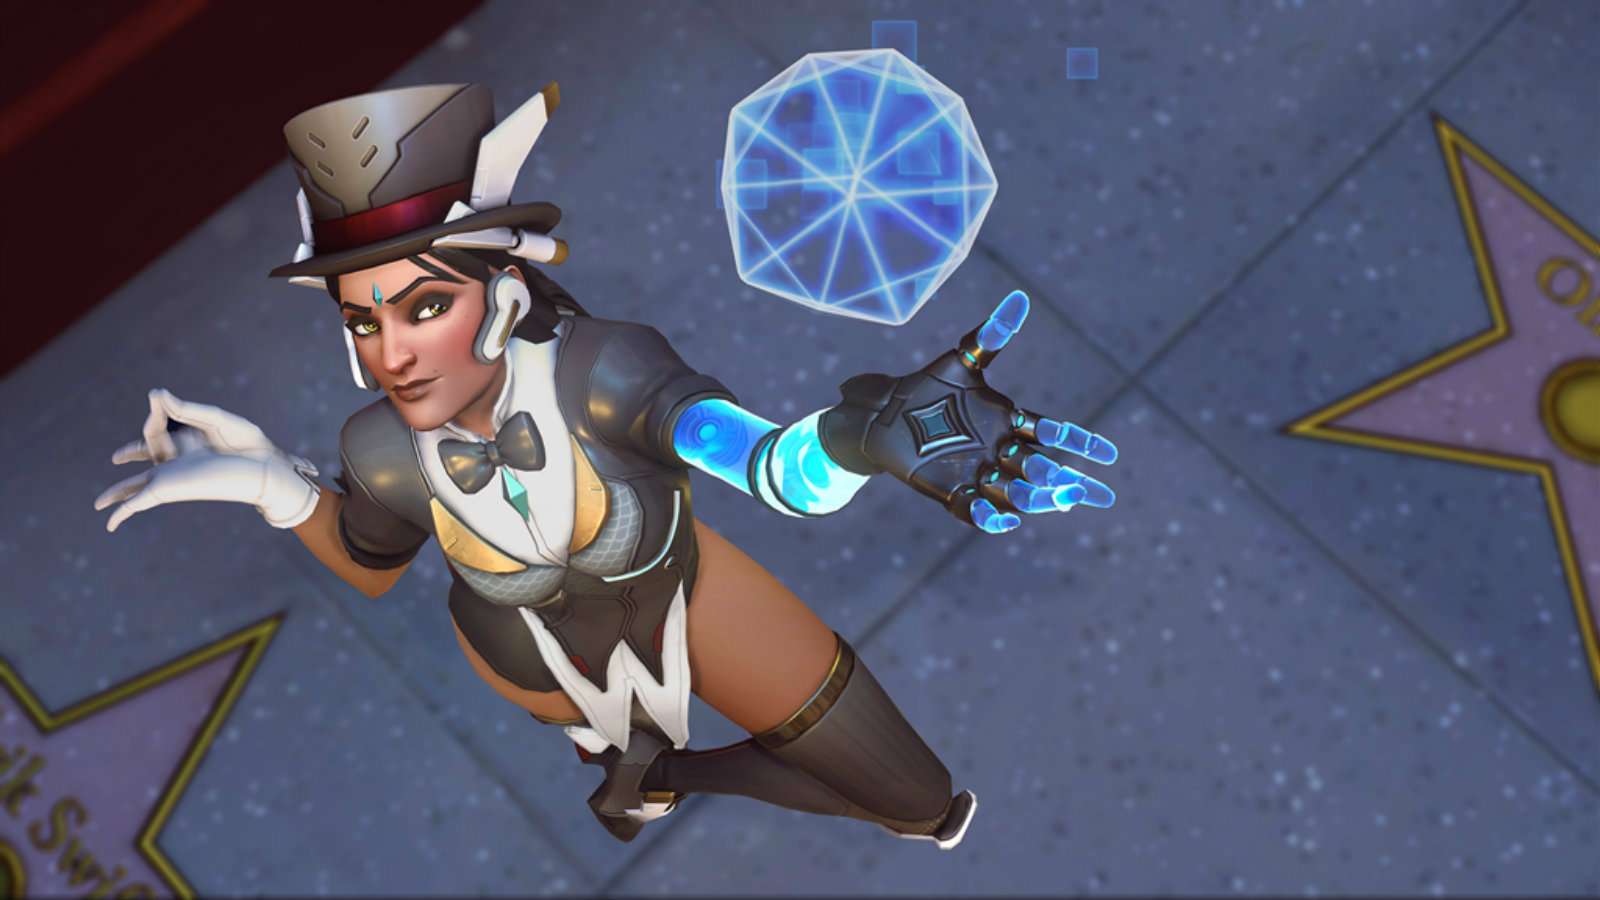 Symmetra is dressed as a magican in Overwatch